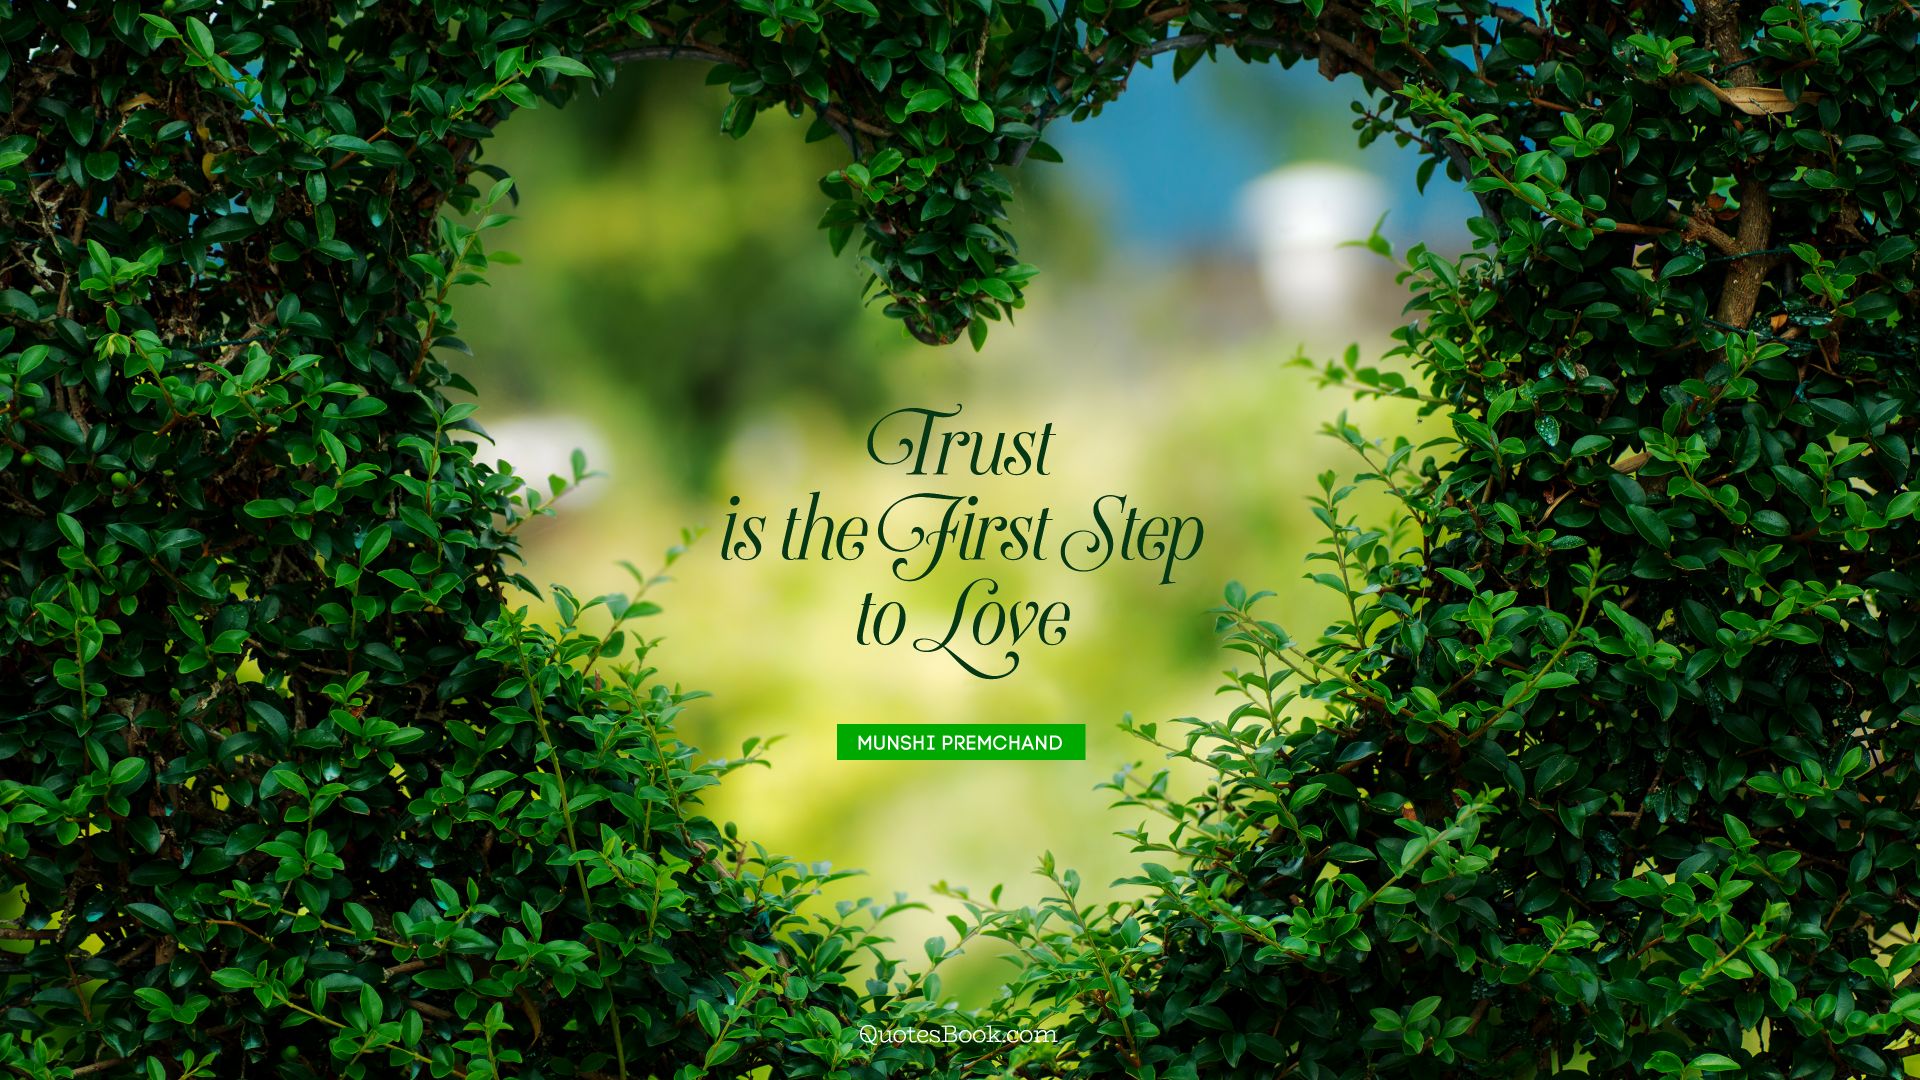 Trust is the first step to love. - Quote by Munshi Premchand